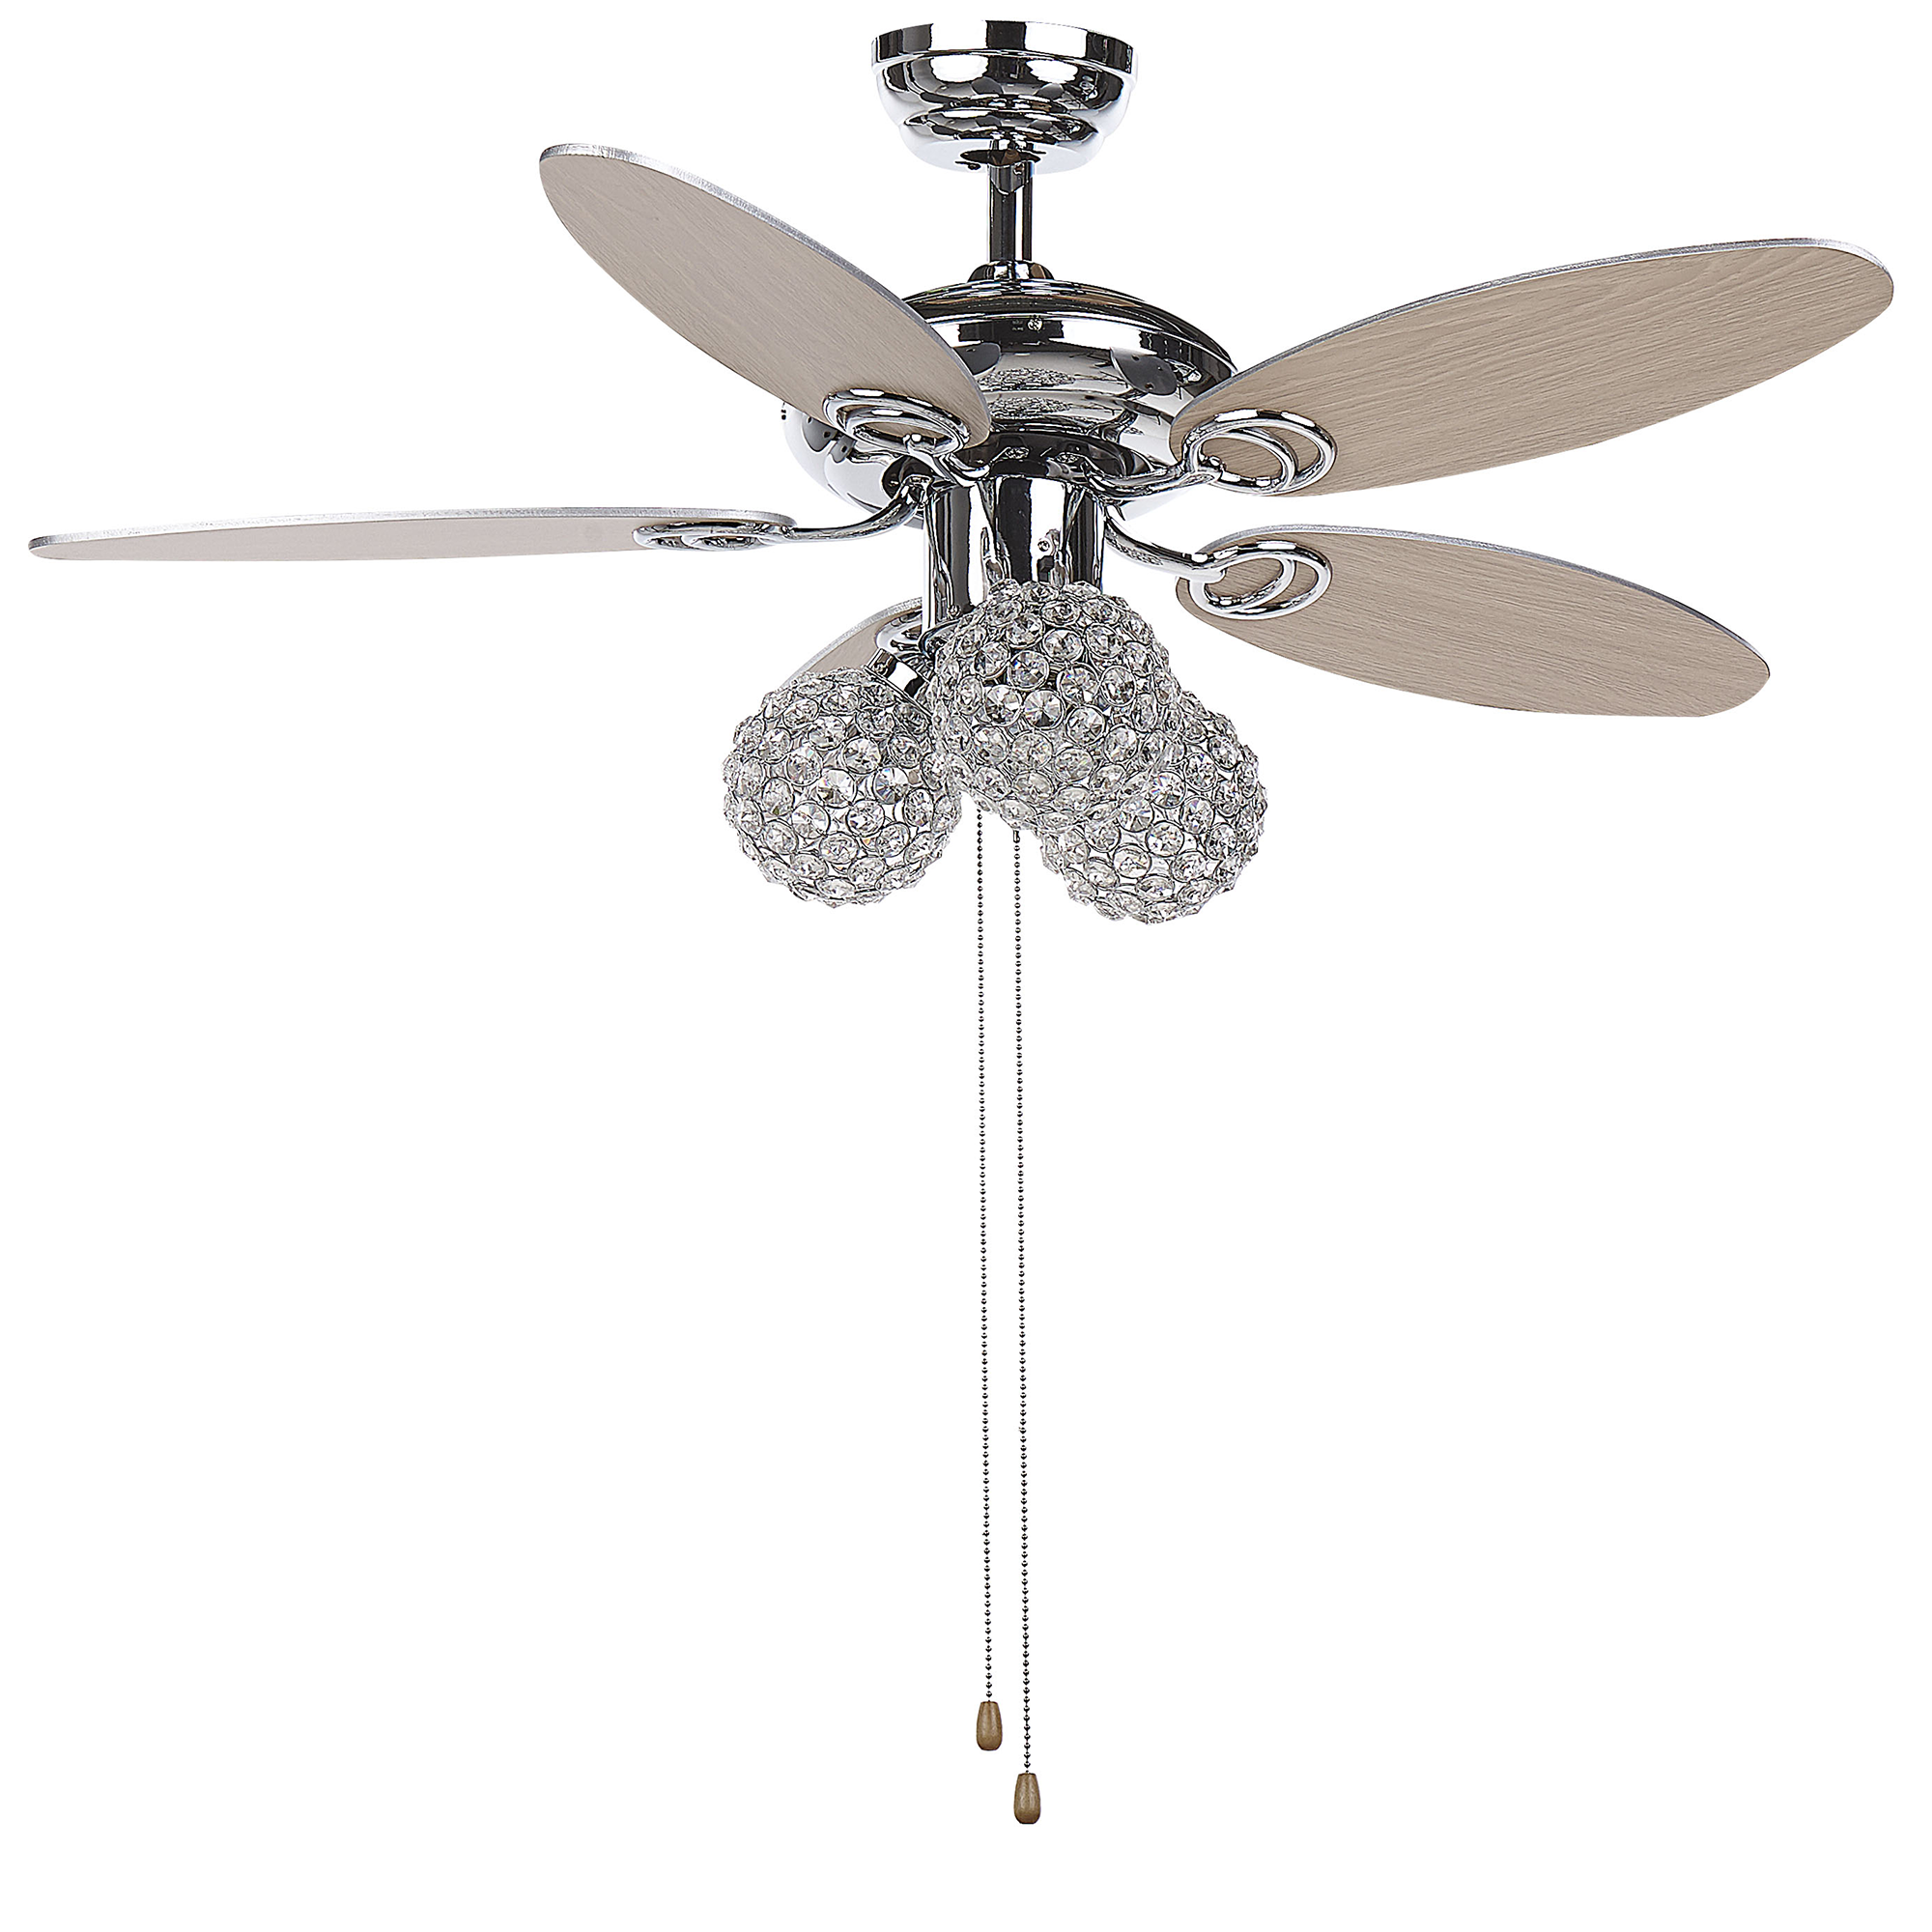 Beliani Ceiling Fan with Light Silver Metal 3 Acrylic Glass Round Shades Reversible Blades with Pull Chain Speed Control Retro Design